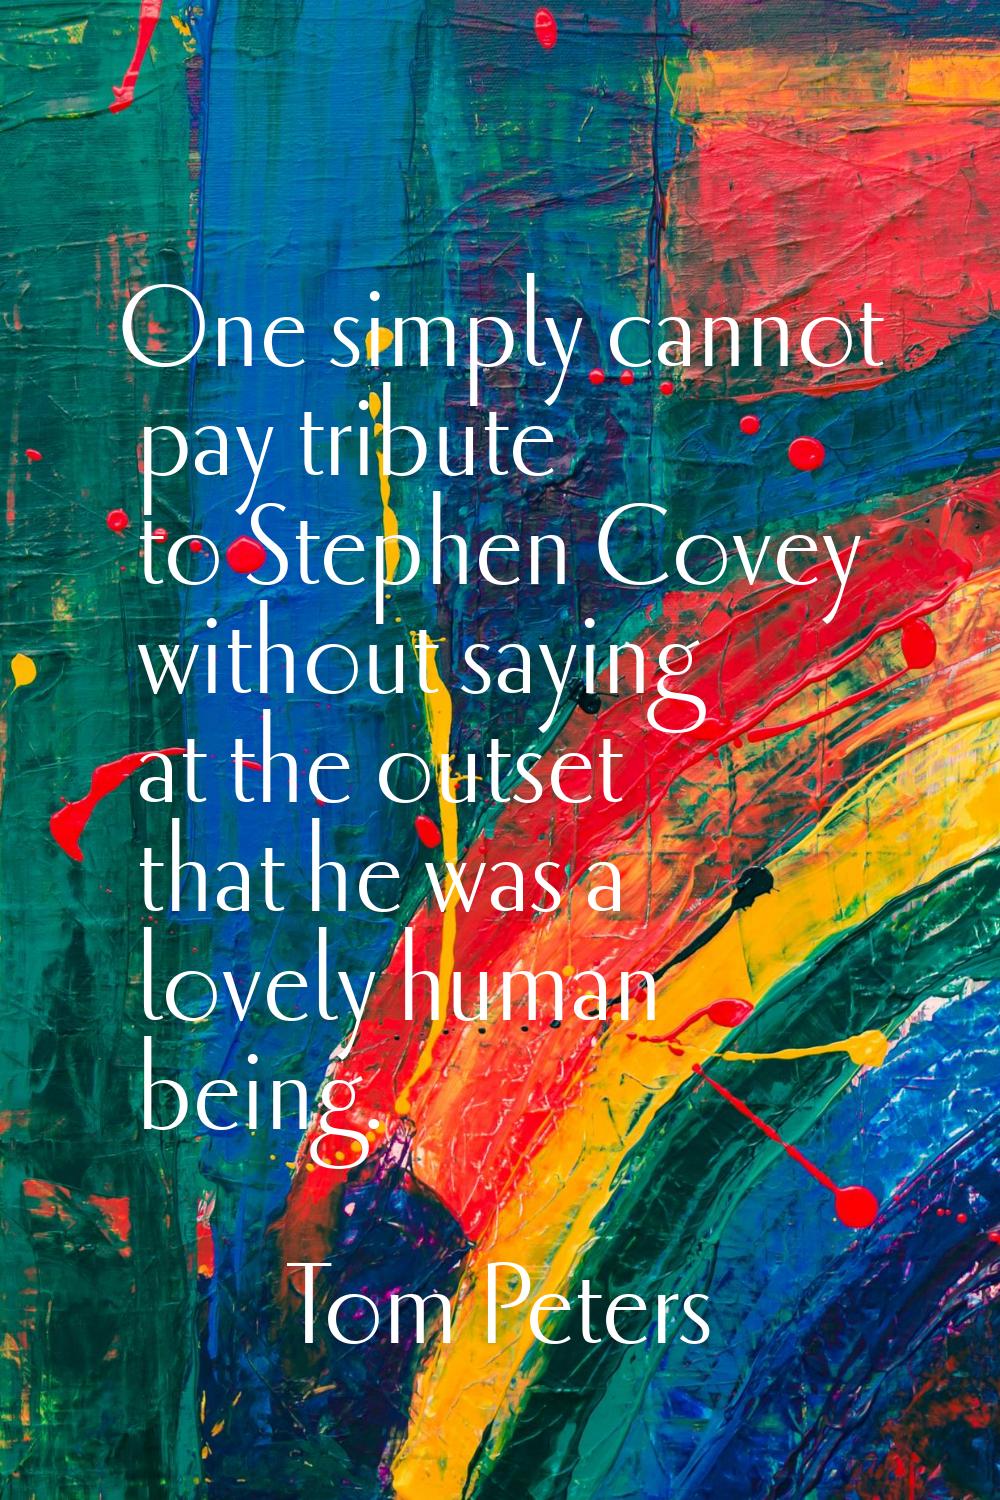 One simply cannot pay tribute to Stephen Covey without saying at the outset that he was a lovely hu